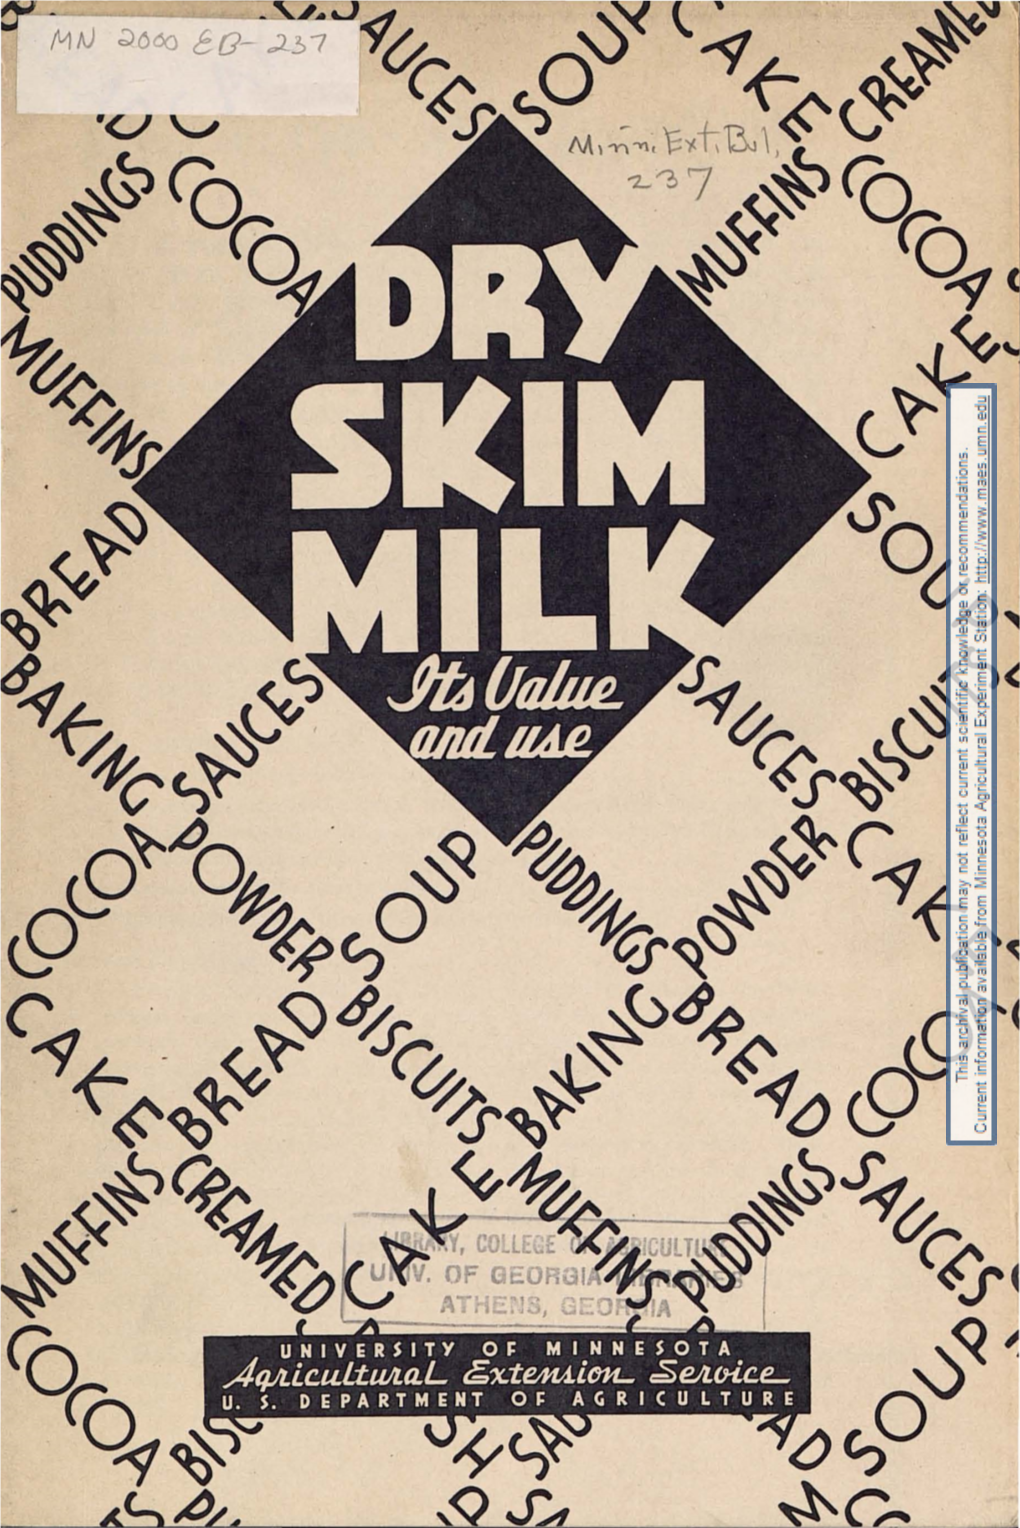 Dry Skim Milk-Its Value and Use